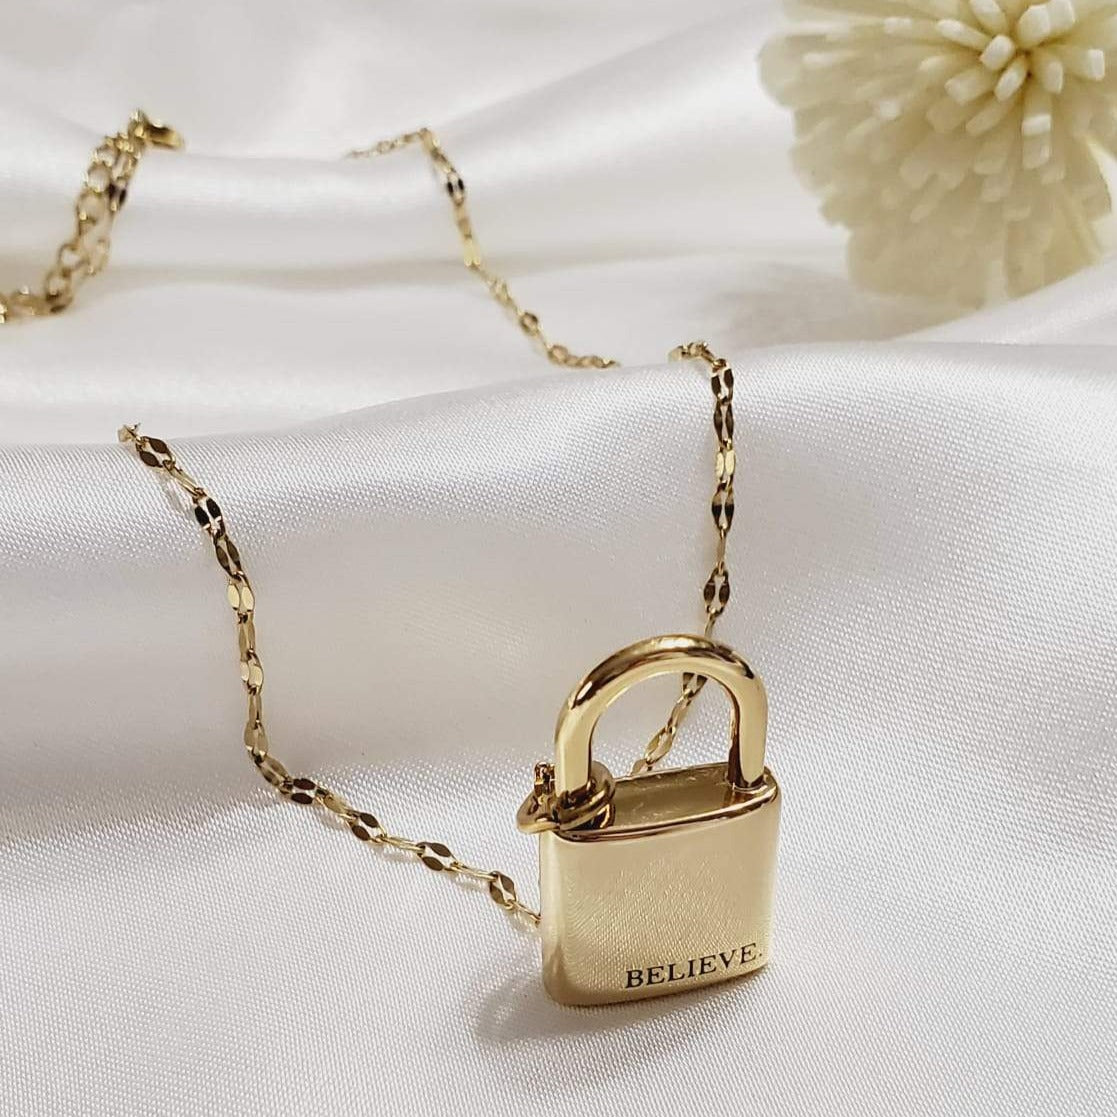 Believe Chain, Believe Lock Necklace, Believe Lock Chain, Motivational Chain, Motivational Necklace, Inspirational Chain, Inspirational Necklace, Lock Necklace, Lock Chain, Gold Filled Chain, Gold Filled Lock Pendant, Meaningful Jewelry, Motivational Jewelry, Inspirational Jewelry, 18k Gold Filled, Water Resistant Jewelry, Water Resistant Necklace, Tarnish Free Jewelry, Tarnish Free Chain, Gift for mom, Gift for anxiety awareness, Gift for sister, Gift for daughter, gift for friend